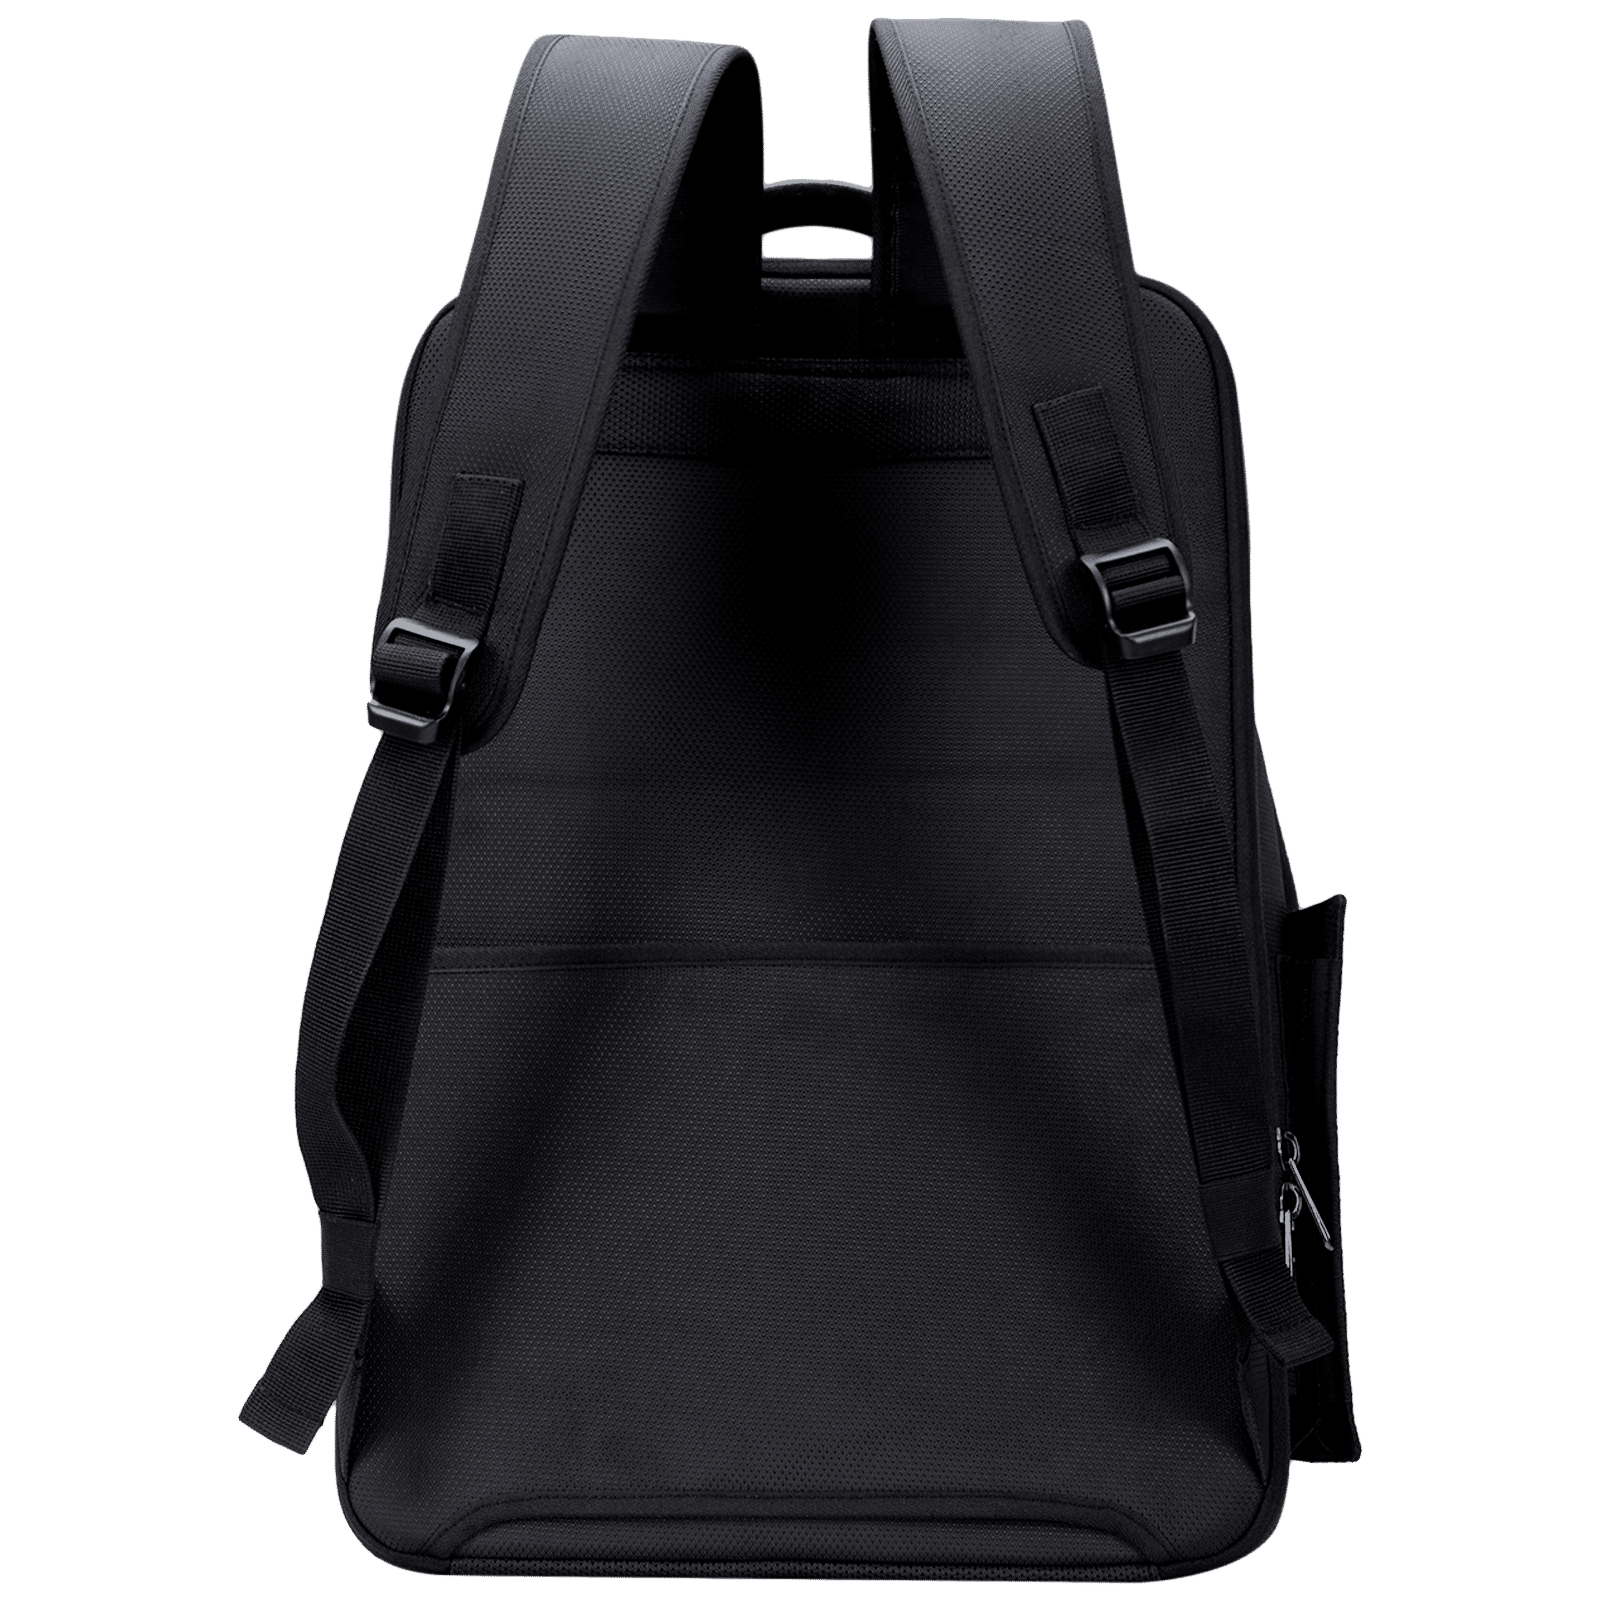 Buy Croma CRSCPRMBKA264401 Polyester Fabric Laptop Backpack for 17 Inch ...